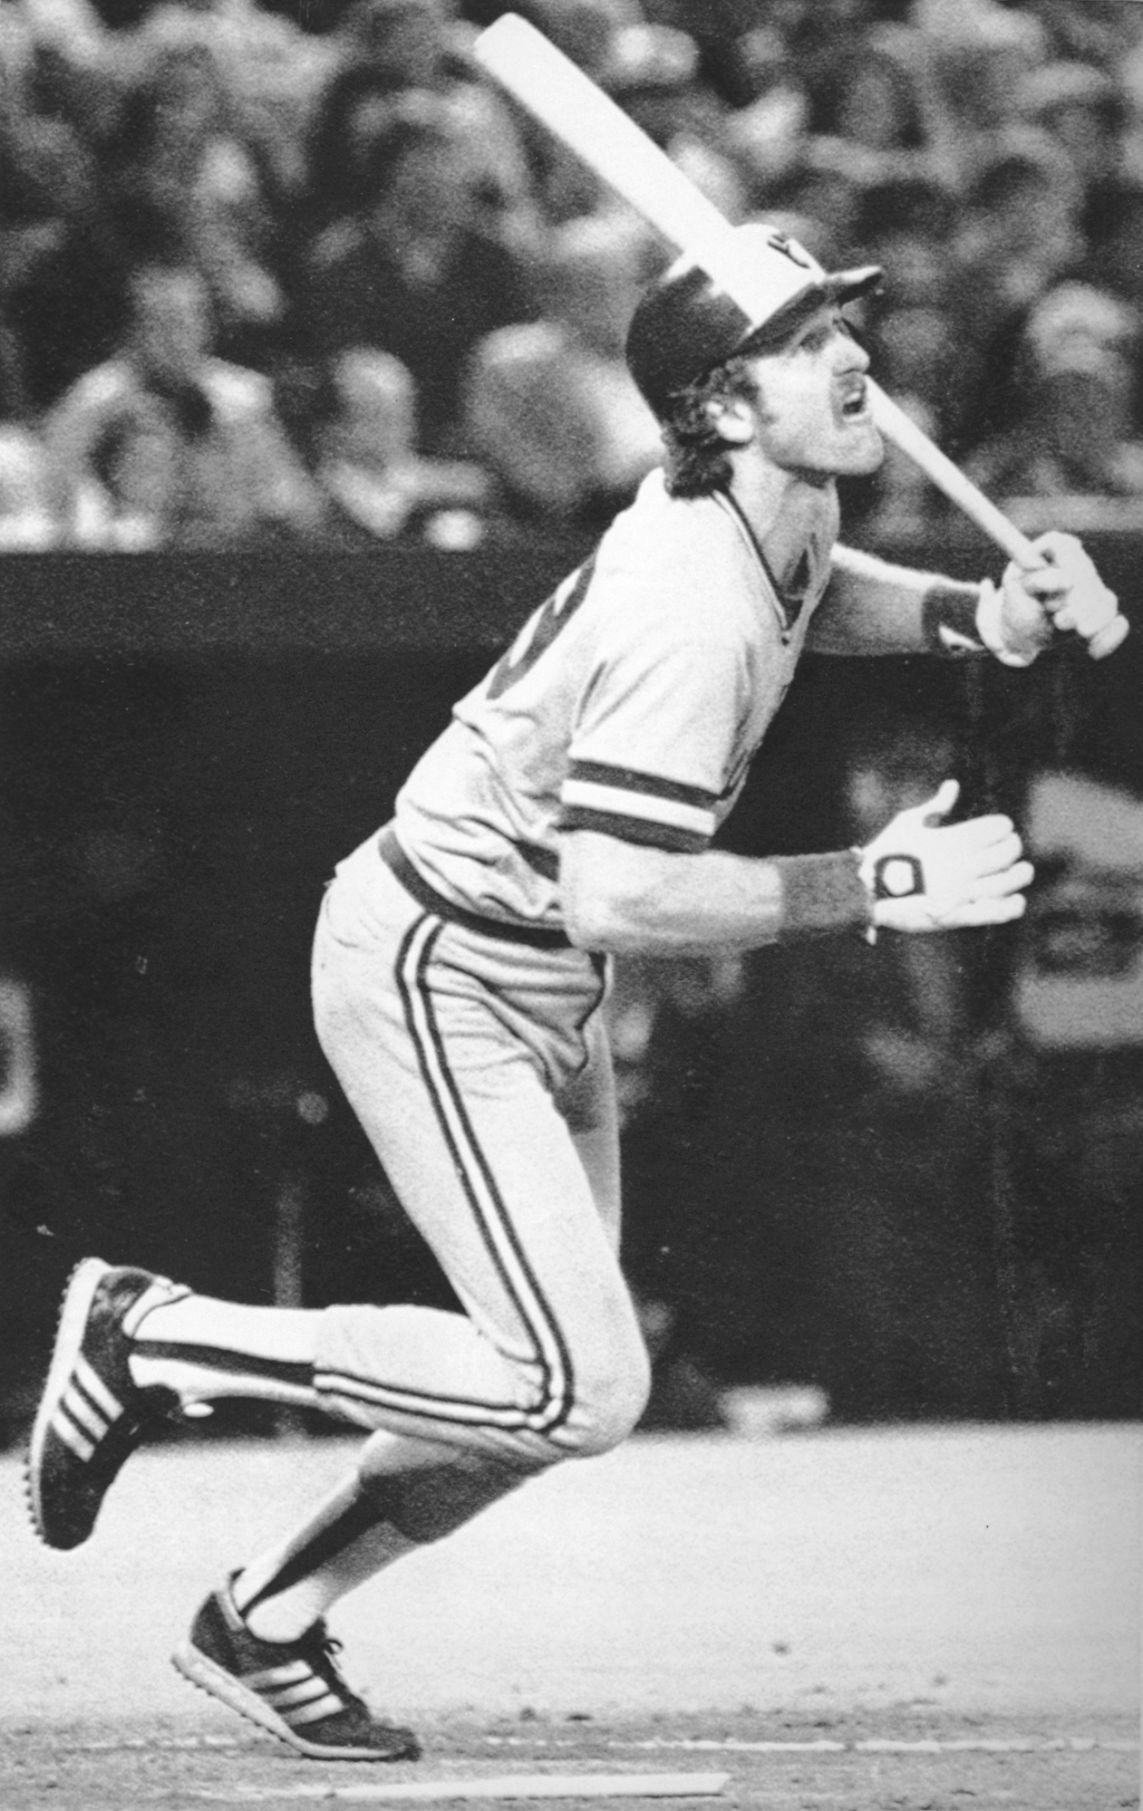 80s Baseball - 6/5/82 The Brewers hit three straight homers for the second  time in a week. Robin Yount, Cecil Cooper, and Ben Oglivie go  back-to-back-to-back in an 11-3 win over the